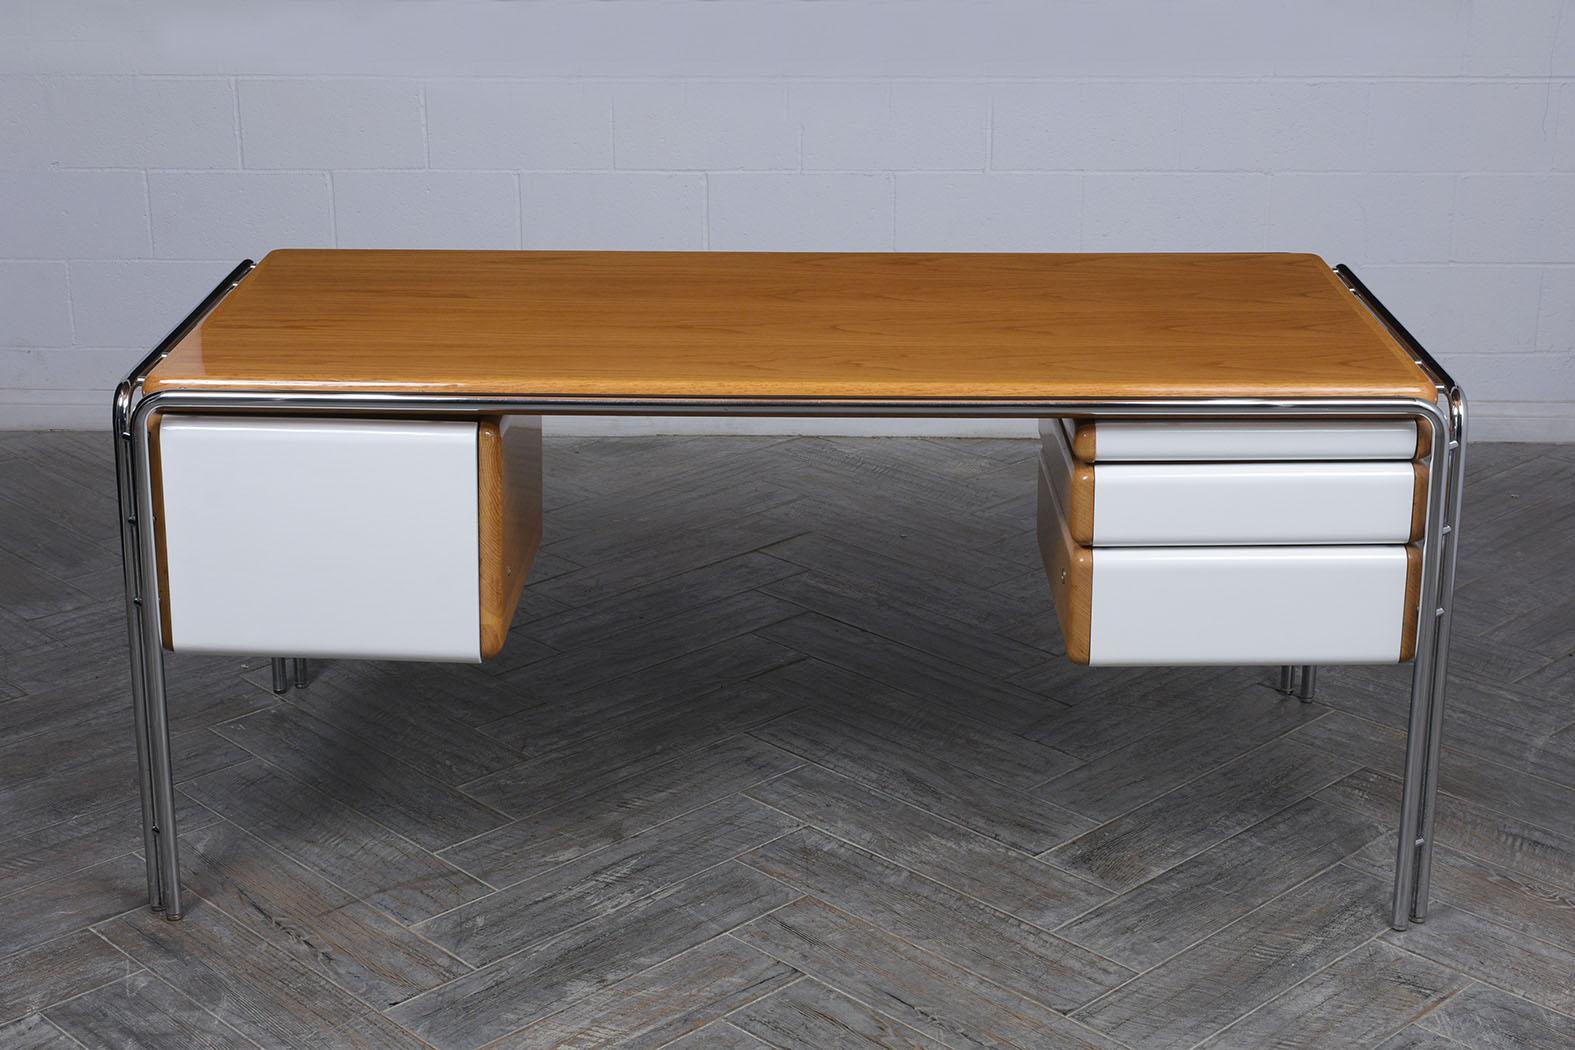 This 1960's Modern Floating Desk has been fully restored and stained in light oak & white color combination with a newly lacquered finish. This Danish writing table features a sturdy tubular chrome frame, three small drawers that open with ease, and